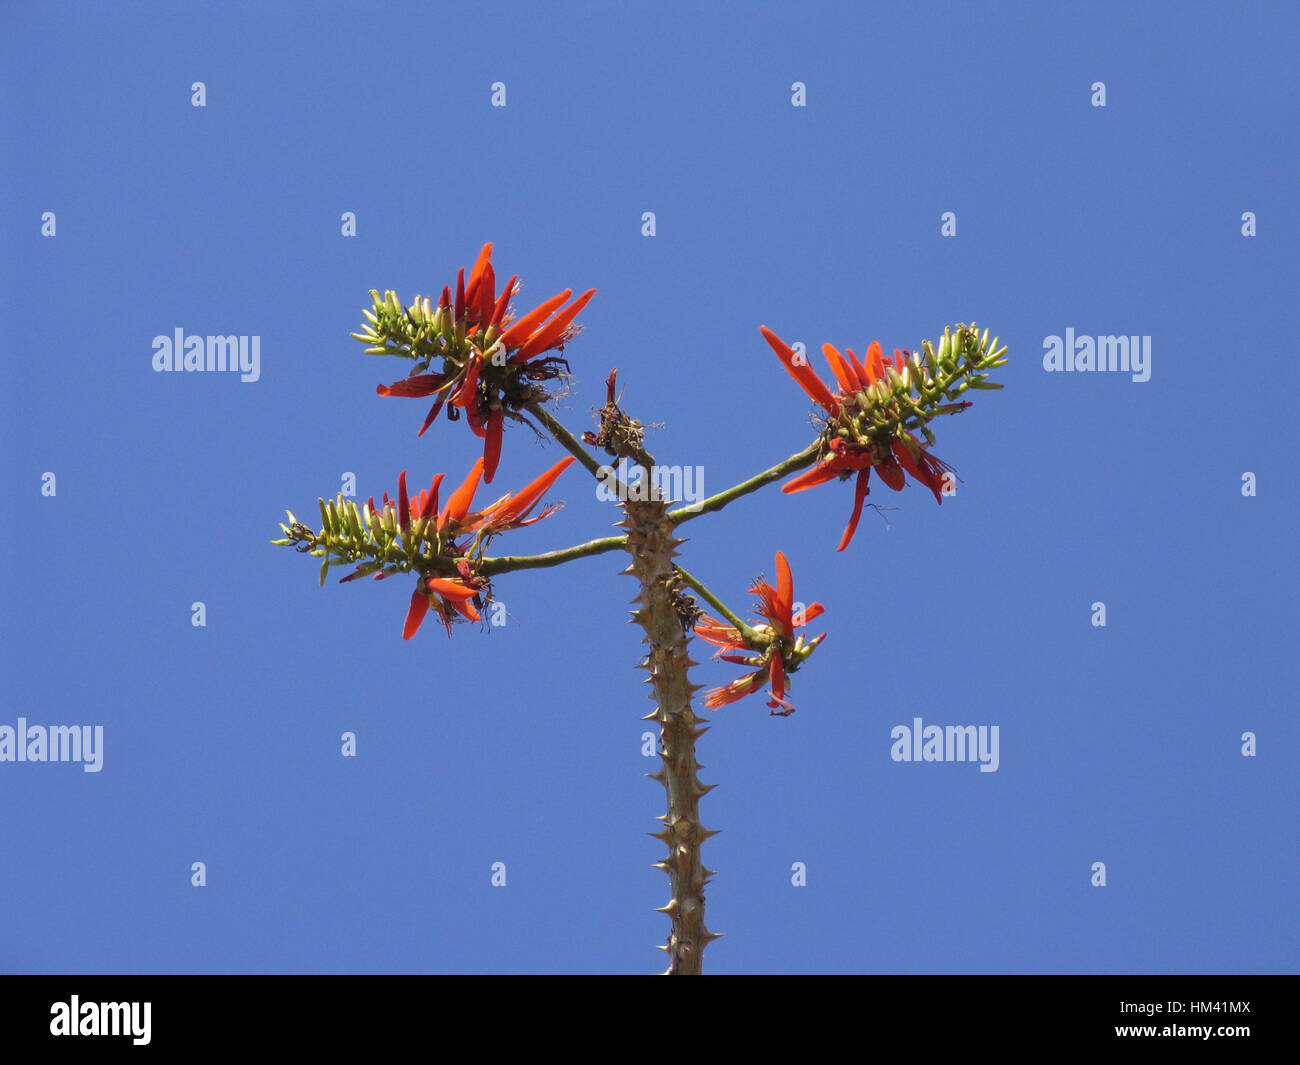 Erythrina Suberosa. Coral tree. Family: Fabaceae. A deciduous tree with prickly branches and beautiful flowers. Stock Photo